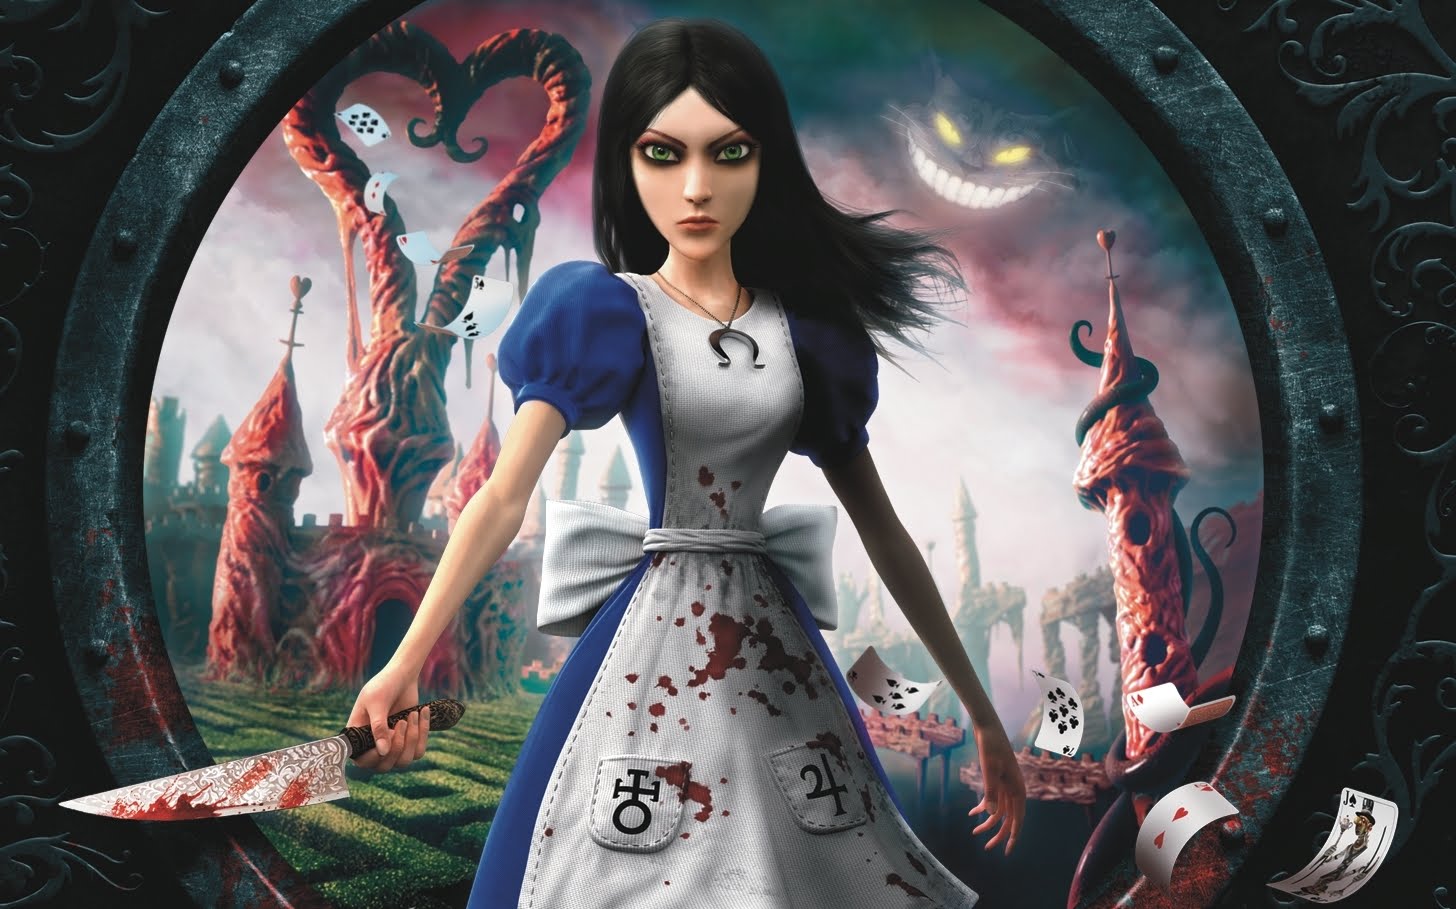 American McGee's Alice Short Films Funded by Kickstarter